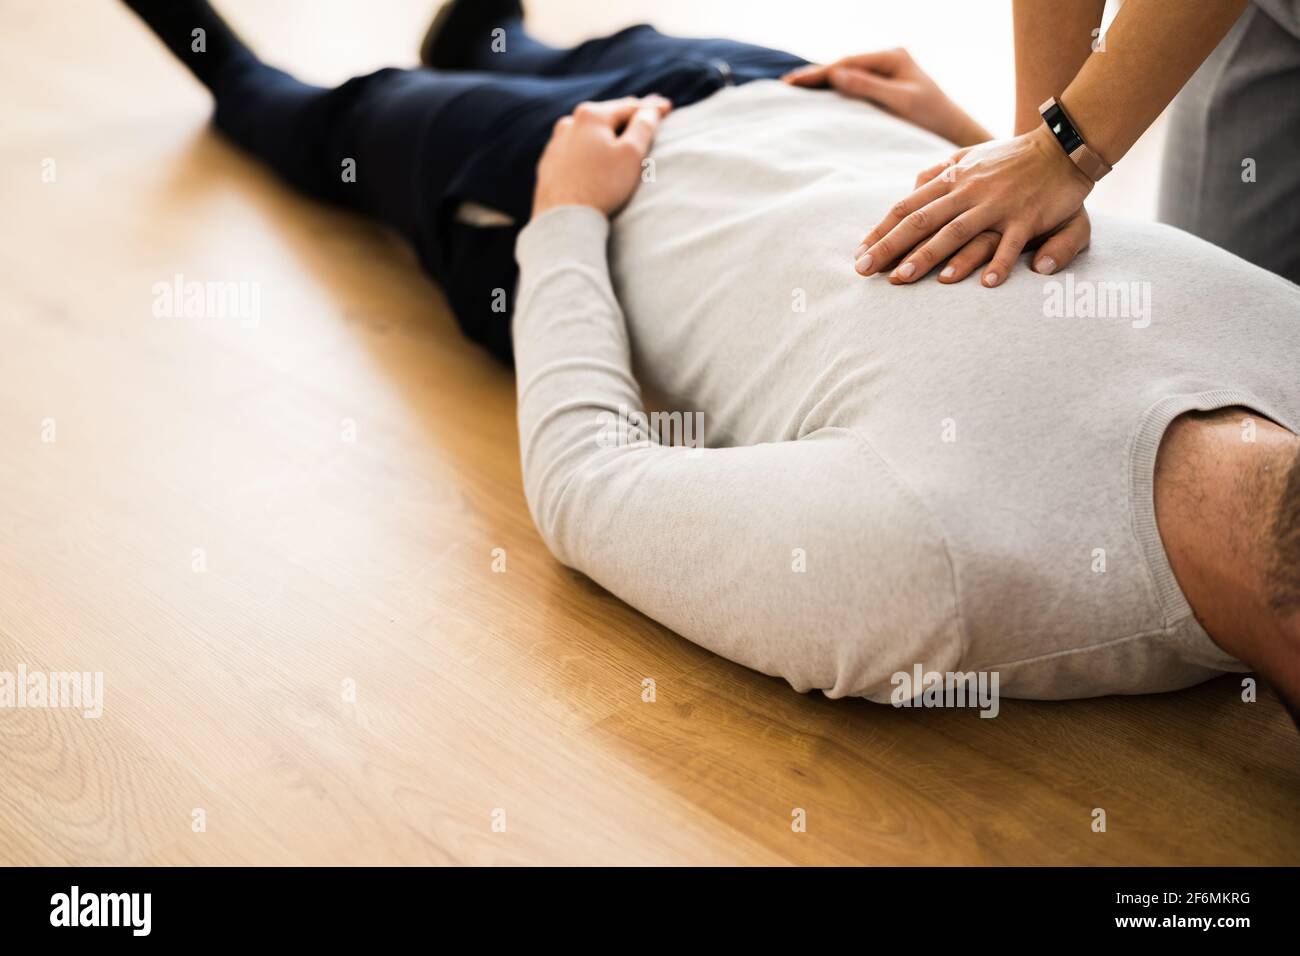 Unconscious CPR Rescue And Cardiopulmonary Ambulance Help Stock Photo